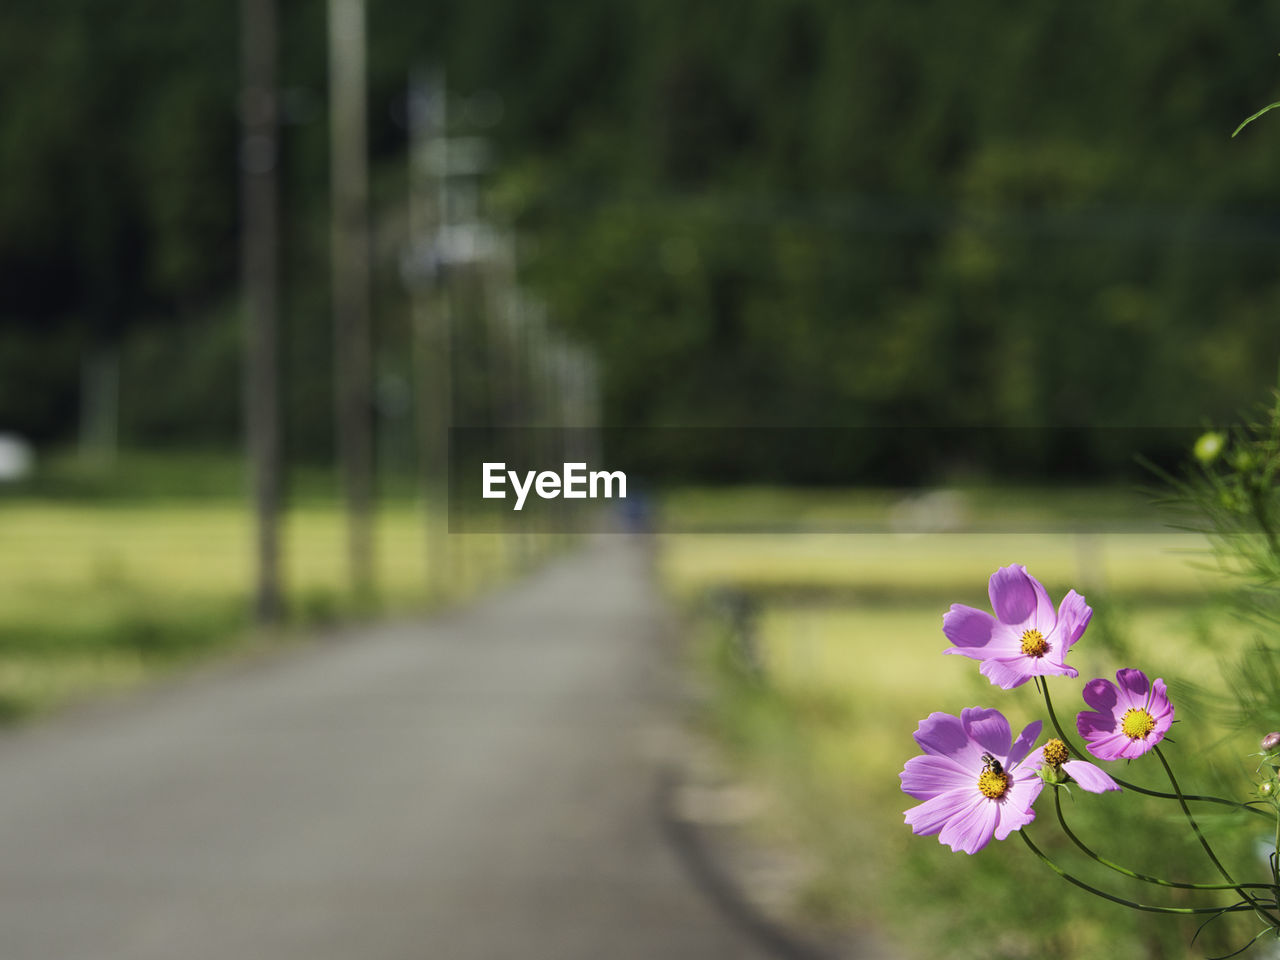 plant, flowering plant, flower, beauty in nature, freshness, nature, green, grass, tree, pink, fragility, no people, growth, focus on foreground, outdoors, flower head, road, petal, day, close-up, inflorescence, leaf, springtime, transportation, selective focus, purple, tranquility, footpath, meadow, blossom